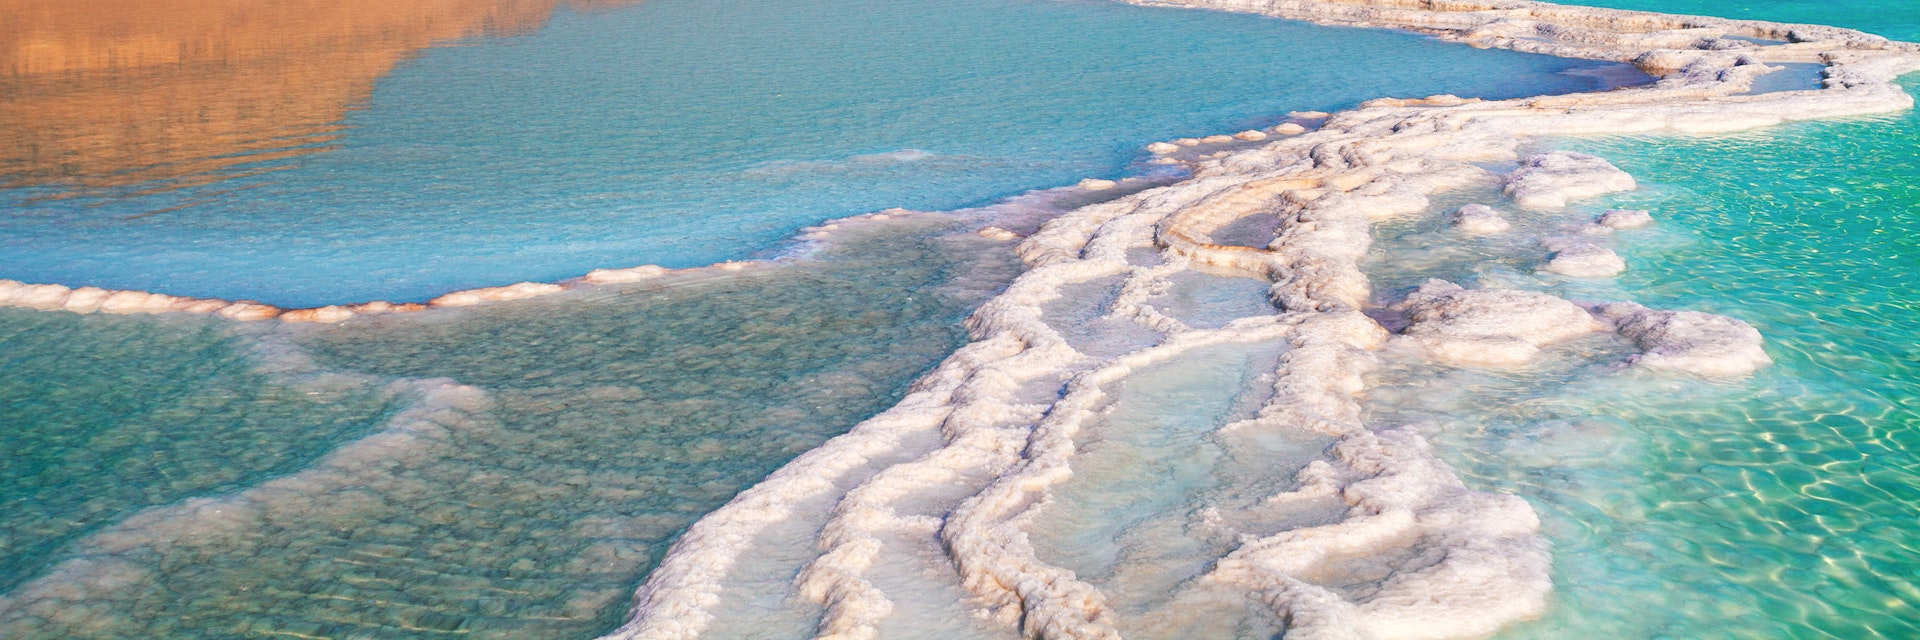 Dead sea salt shore. Ein Bokek, Israel; Shutterstock ID 269867162; Your name (First / Last): Lauren Keith; GL account no.: 65050; Netsuite department name: Online Editorial; Full Product or Project name including edition: Dead Sea Online Update